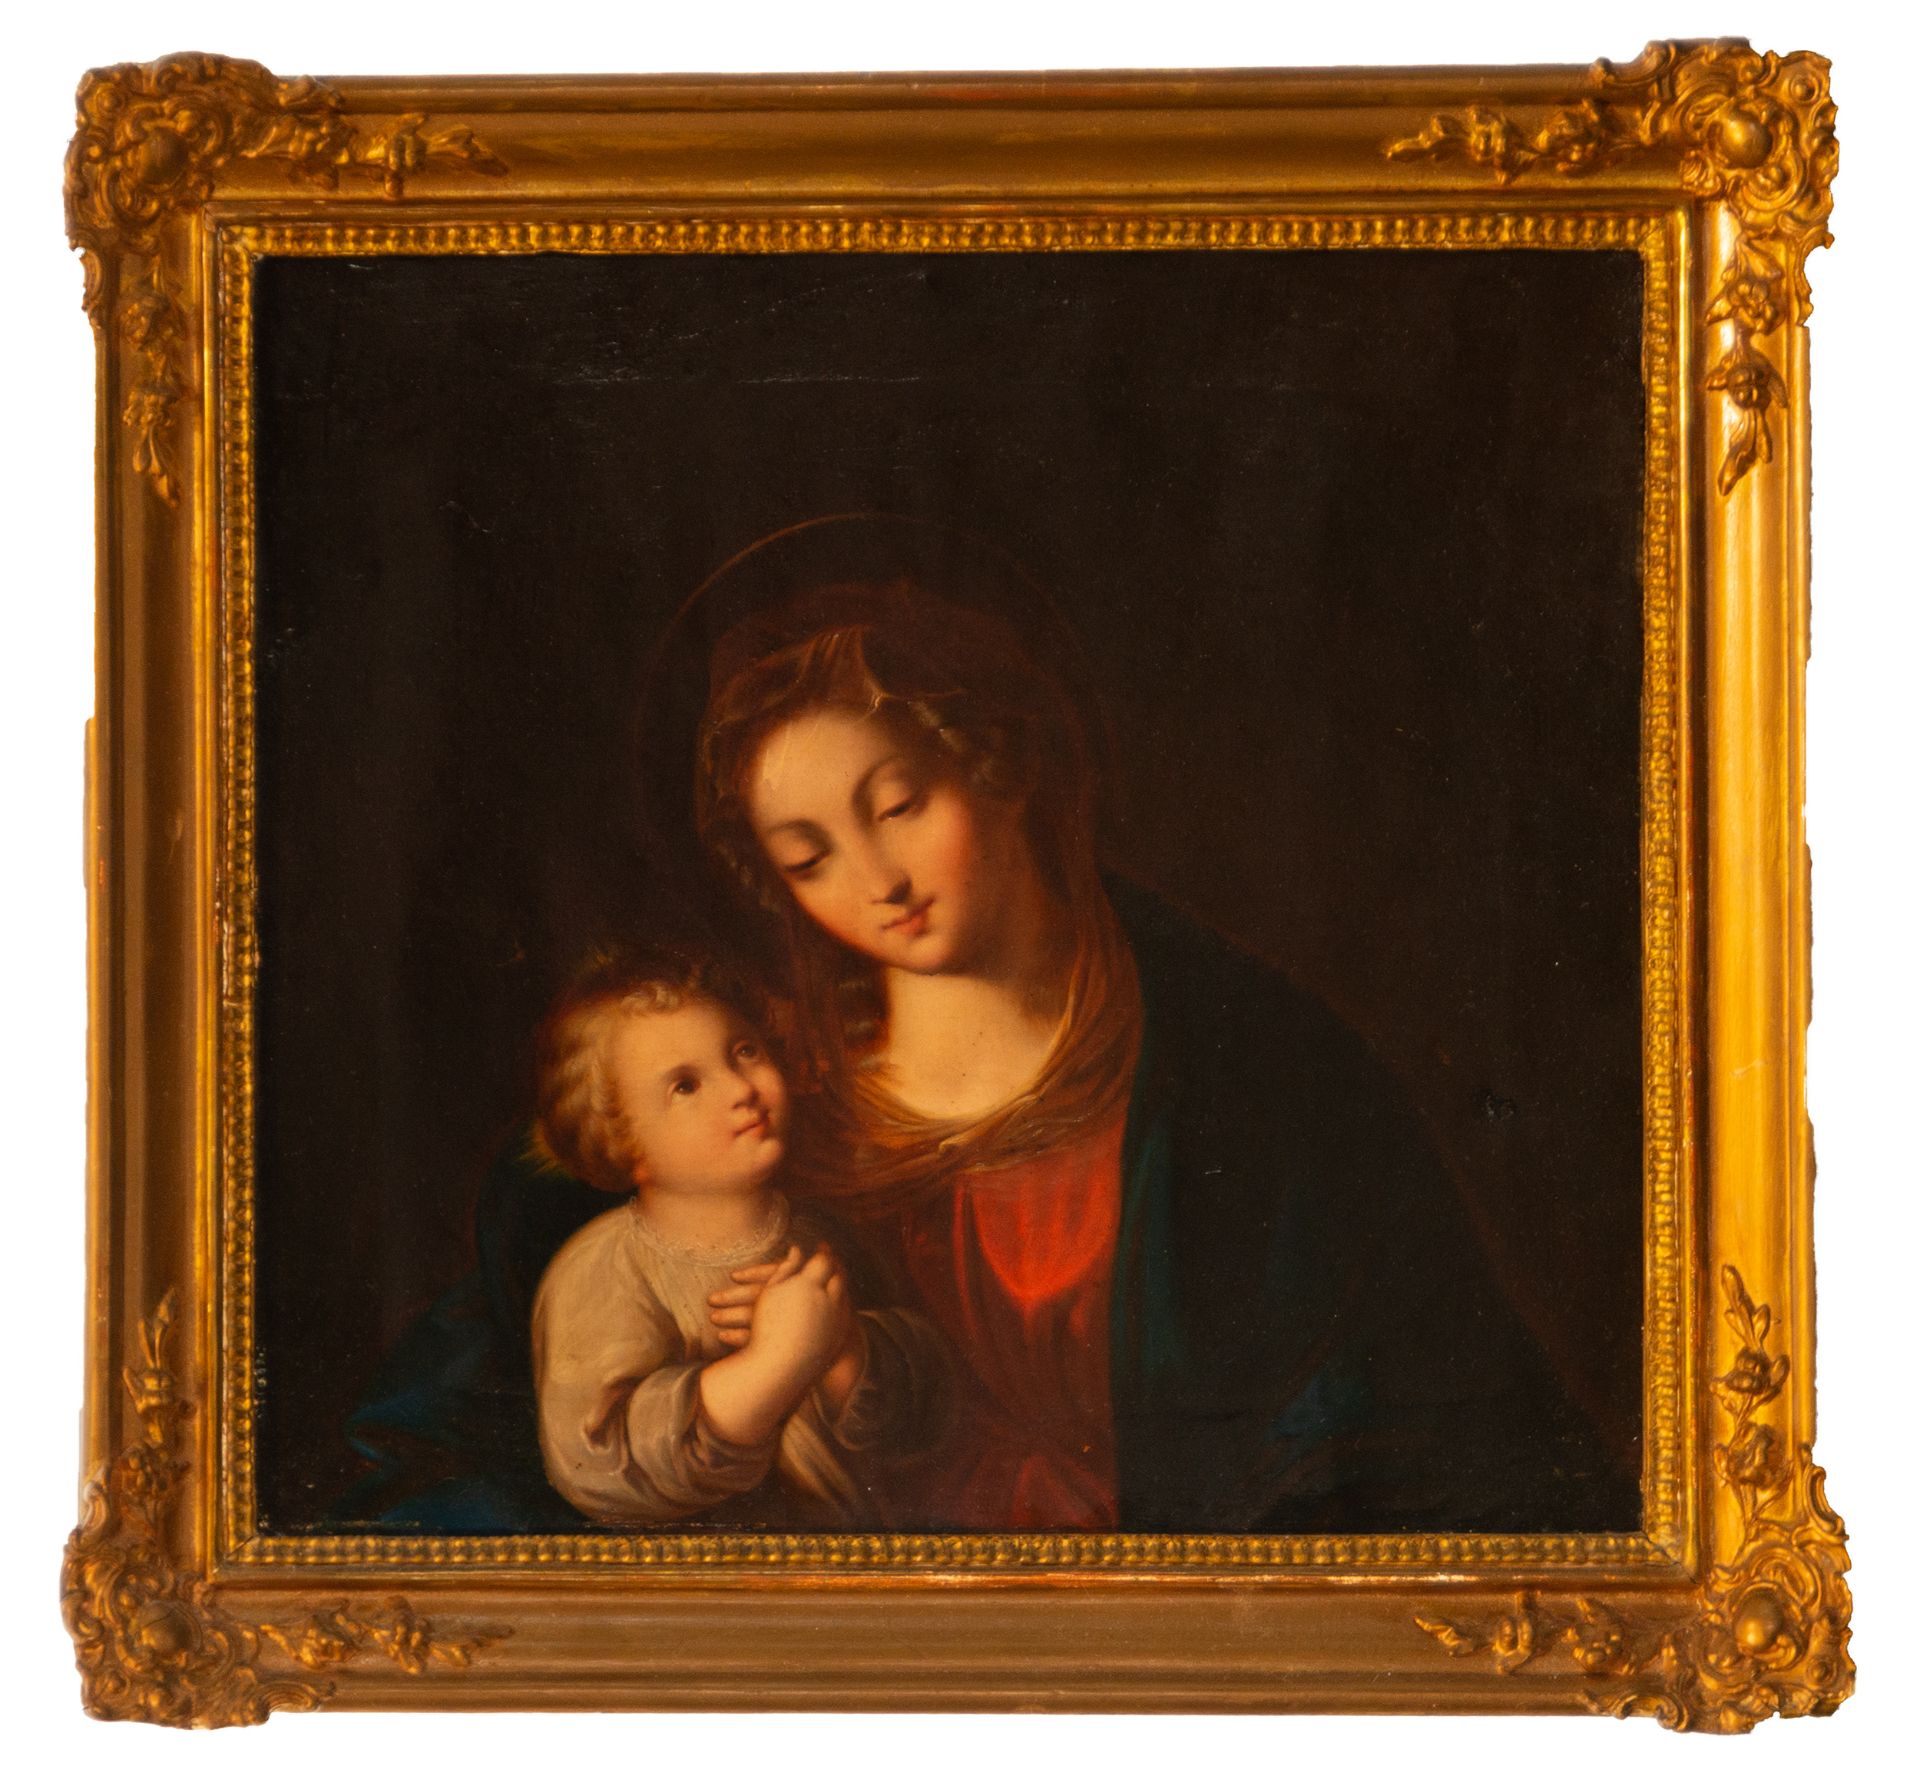 Madonna with Child in Arms, 19th century Italian school